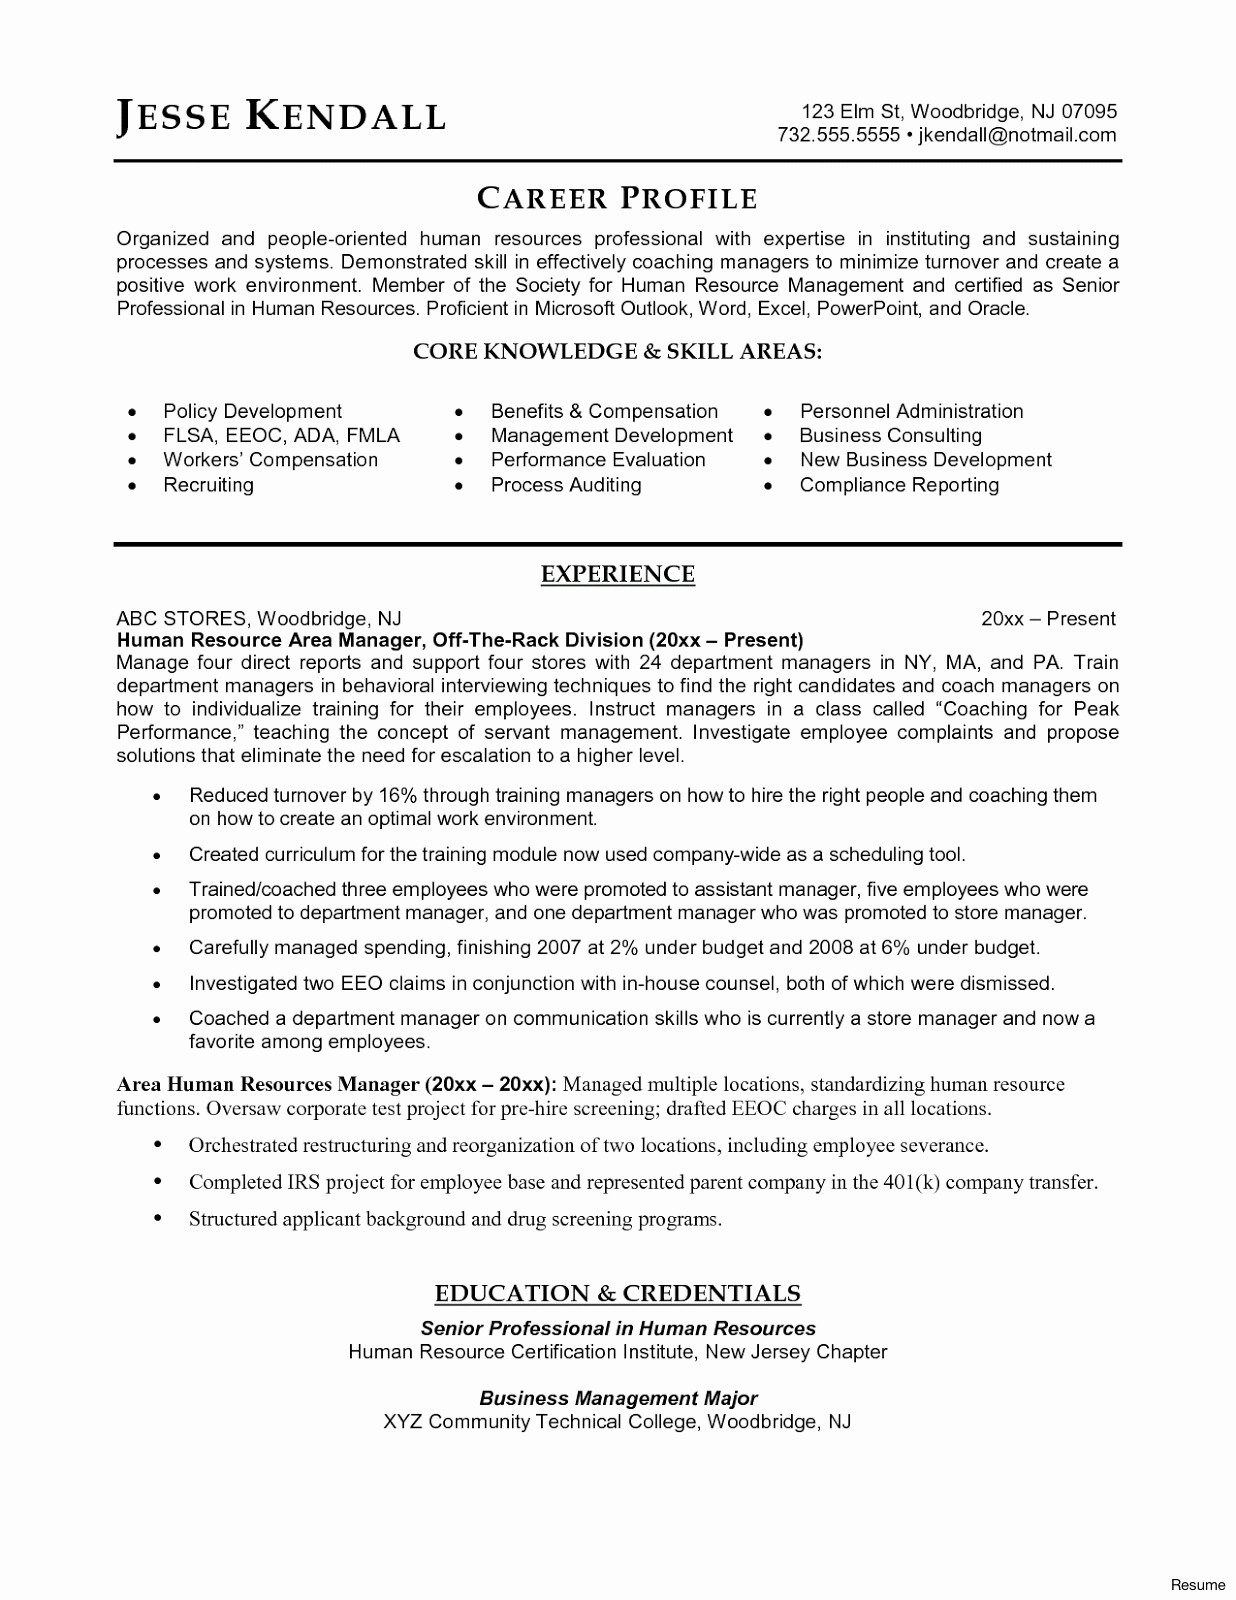 Accredited Investor Verification Letter Template - Cover Letter Templete Pdf format